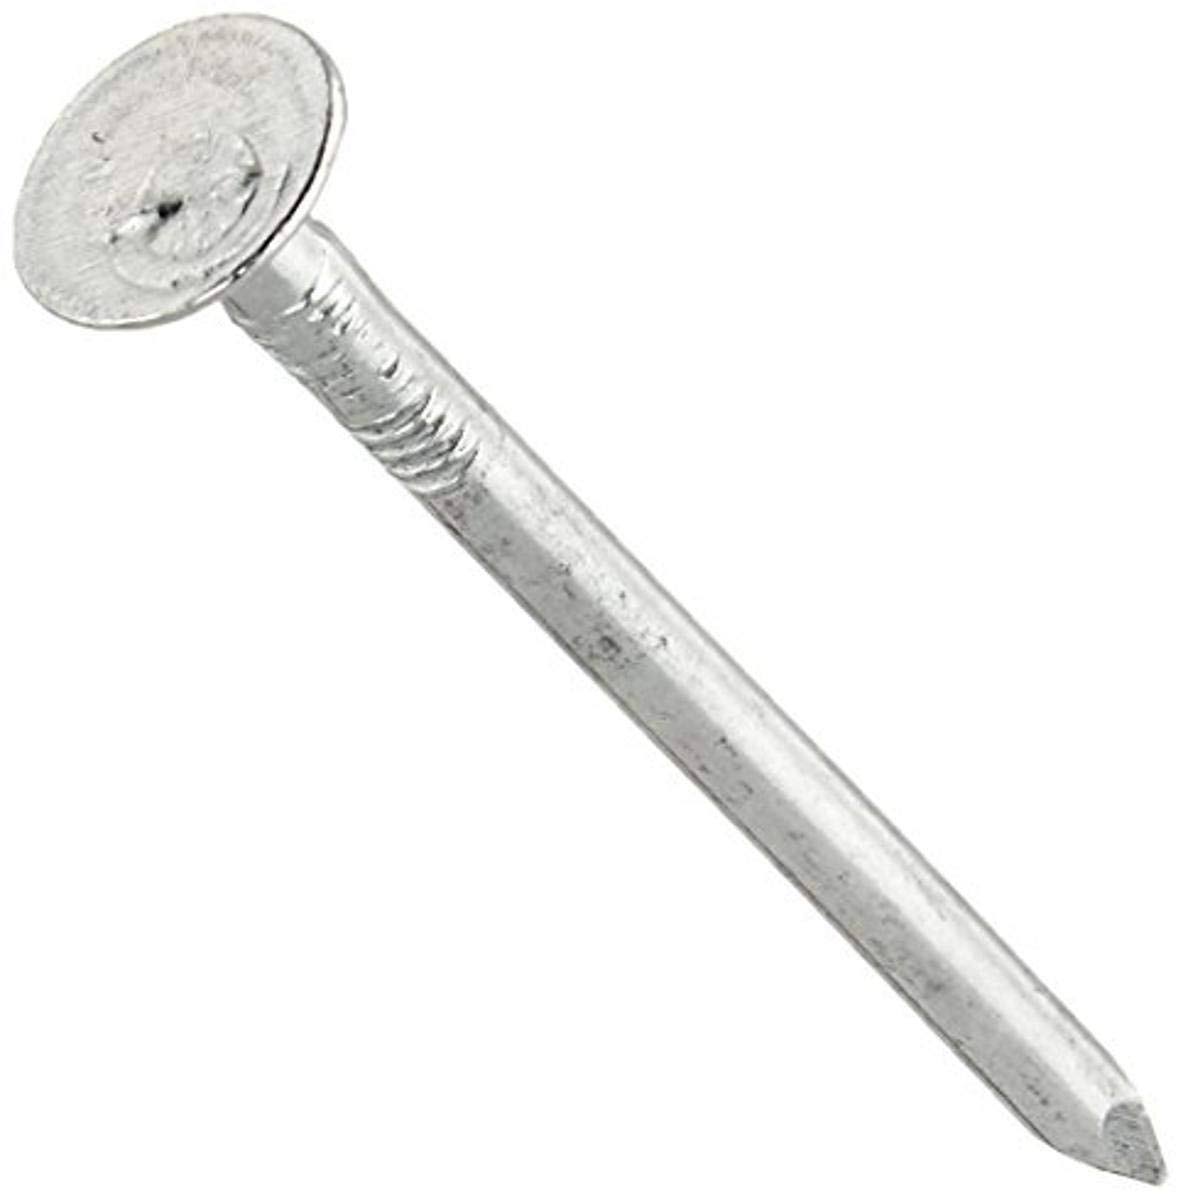 Hillman Fasteners 461463 Galvanized Roofing Nail - 2", 1lb